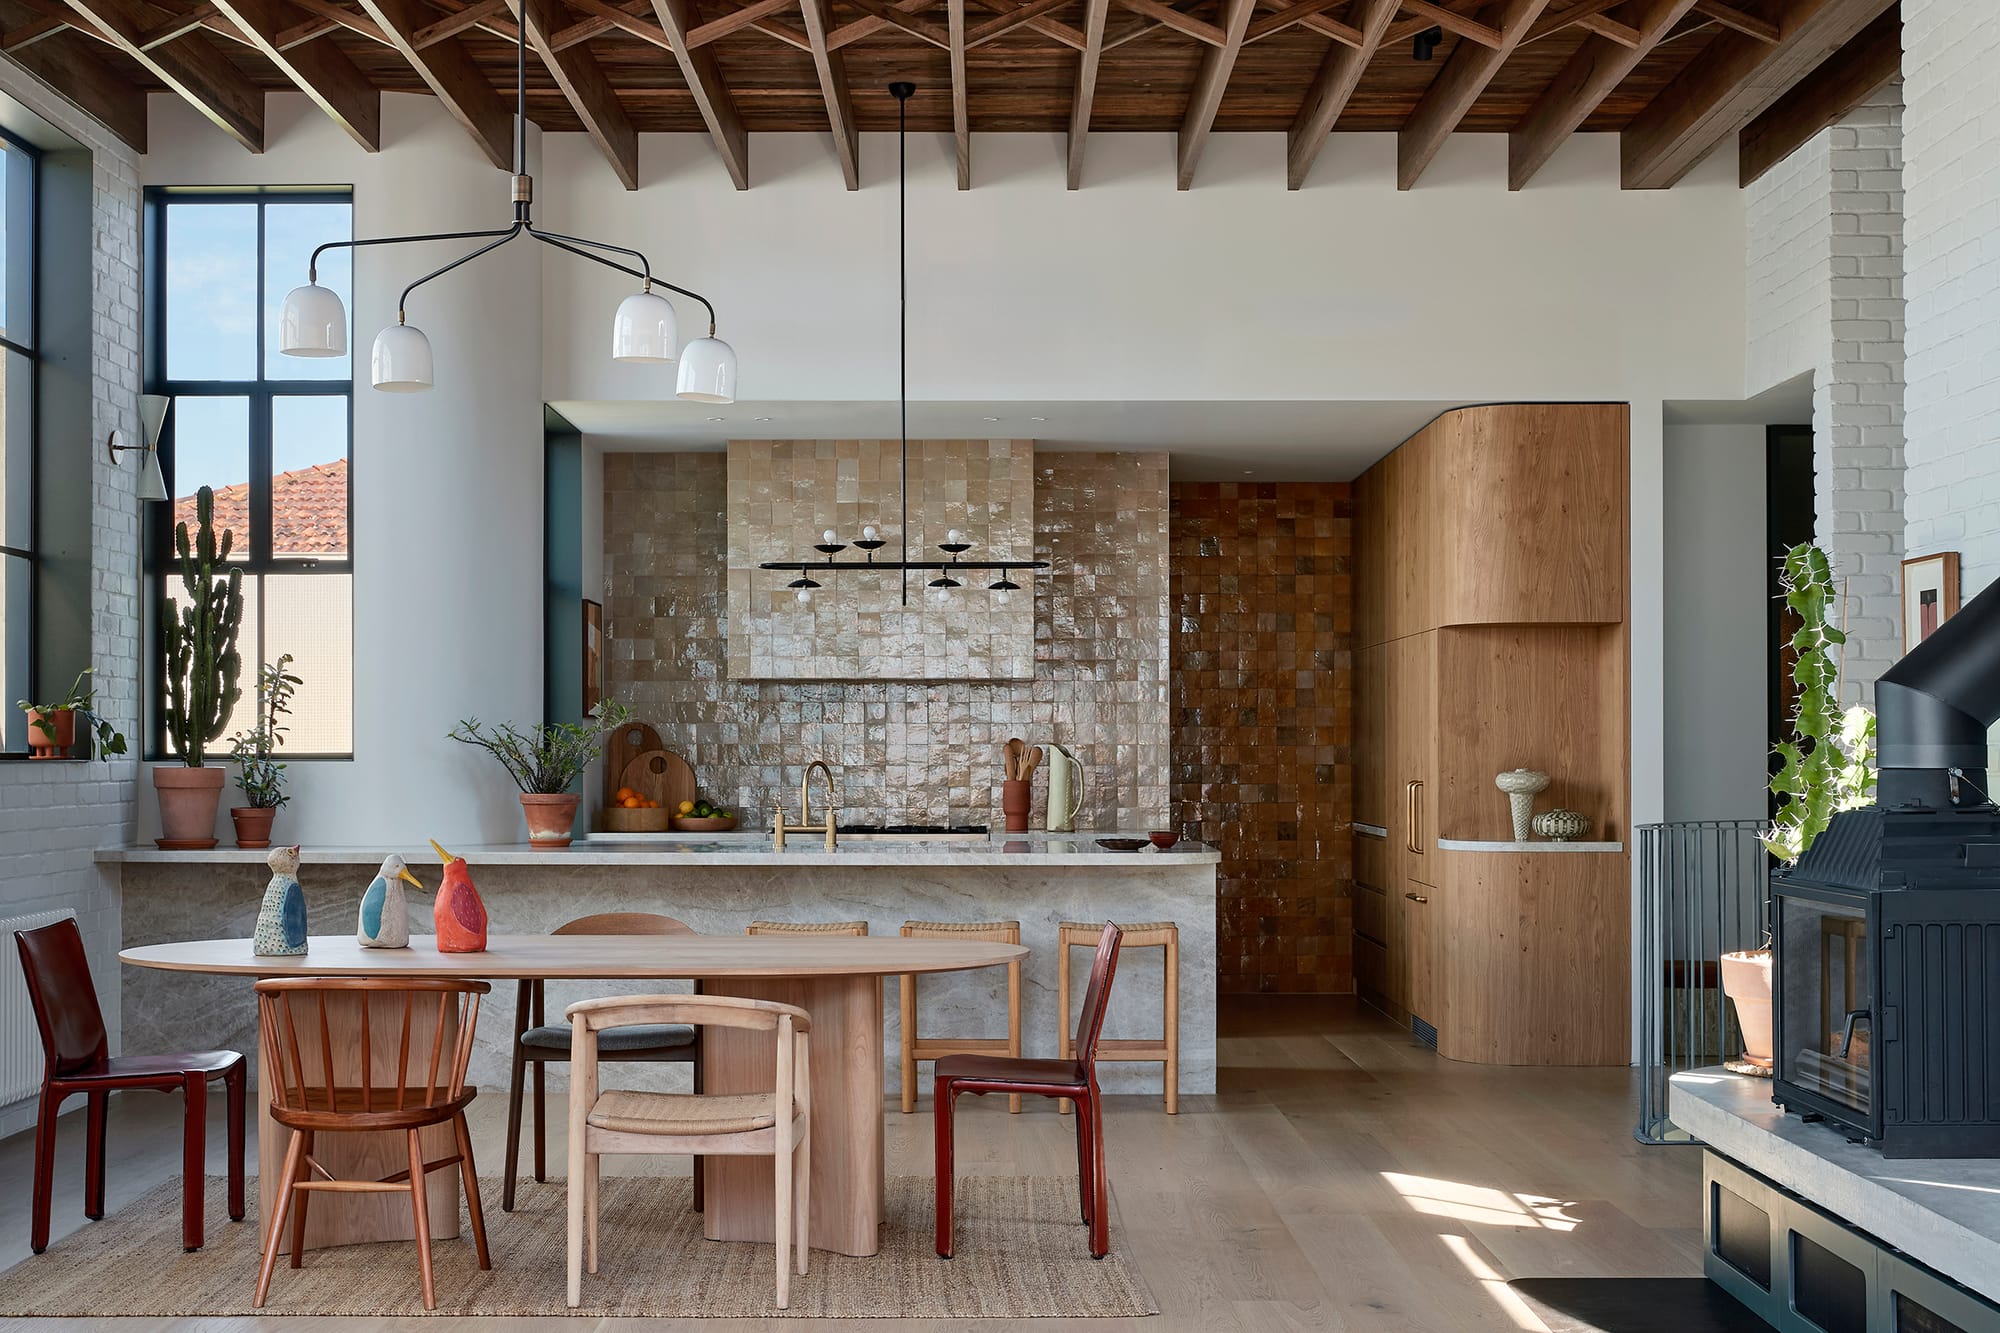 Fabrica by mcmahon and nerlich. Photography by Shannon McGrath. Open plan dining and kitchen with exposed ceiling beams and white plaster walls. Timber dining table with eclectic chairs. Beige tiles on wall in kitchen.